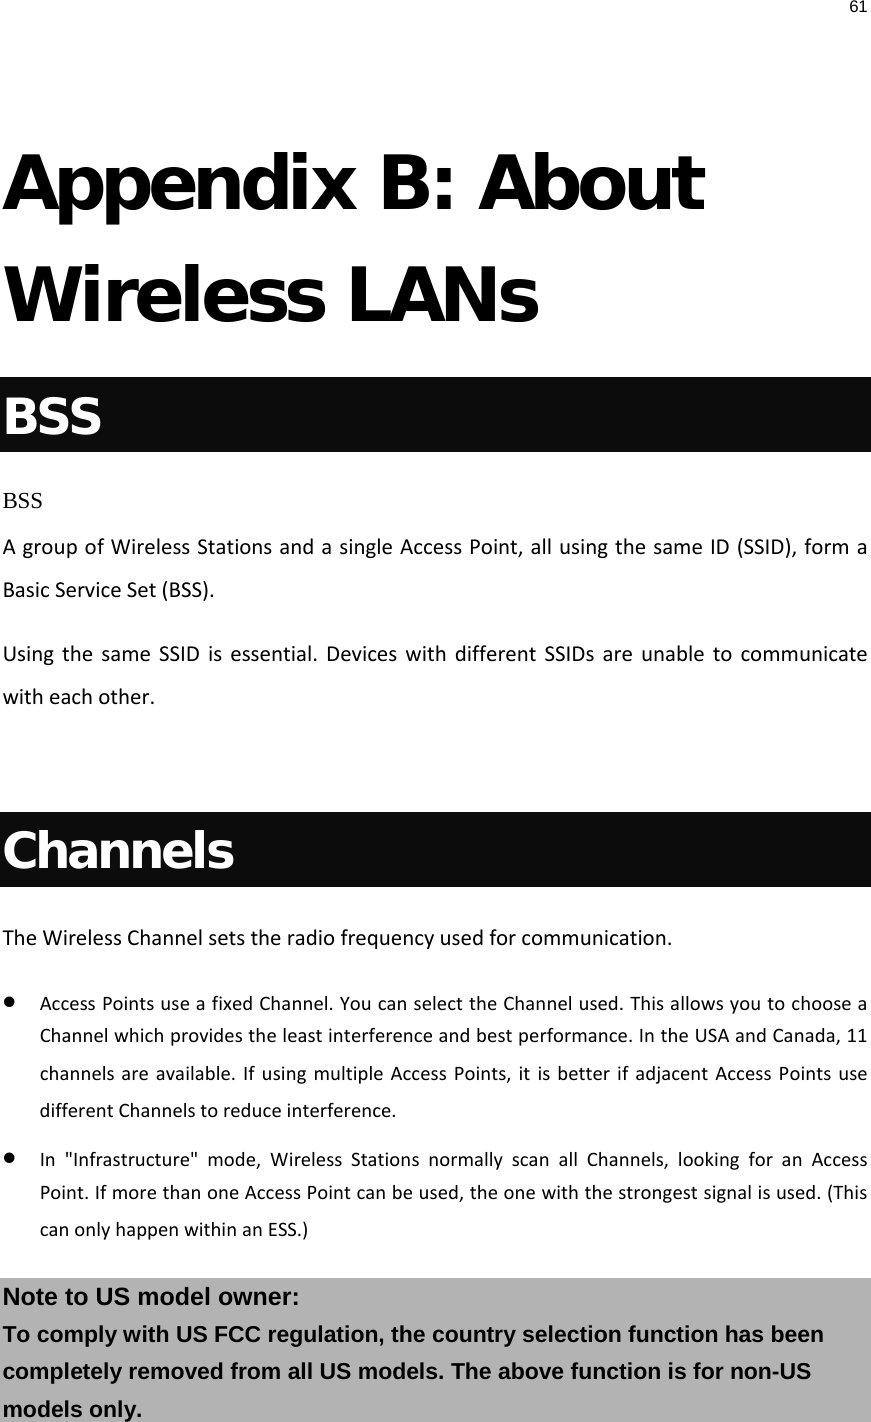 61   Appendix B: About Wireless LANs BSS BSS A group of Wireless Stations and a single Access Point, all using the same ID (SSID), form a Basic Service Set (BSS). Using the same SSID is essential. Devices with different SSIDs are unable to communicate with each other.  Channels The Wireless Channel sets the radio frequency used for communication.  • Access Points use a fixed Channel. You can select the Channel used. This allows you to choose a Channel which provides the least interference and best performance. In the USA and Canada, 11 channels are available. If using multiple Access Points, it is better if adjacent Access Points use different Channels to reduce interference. • In &quot;Infrastructure&quot; mode, Wireless Stations normally scan all Channels, looking for an Access Point. If more than one Access Point can be used, the one with the strongest signal is used. (This can only happen within an ESS.) Note to US model owner:  To comply with US FCC regulation, the country selection function has been completely removed from all US models. The above function is for non-US models only.  